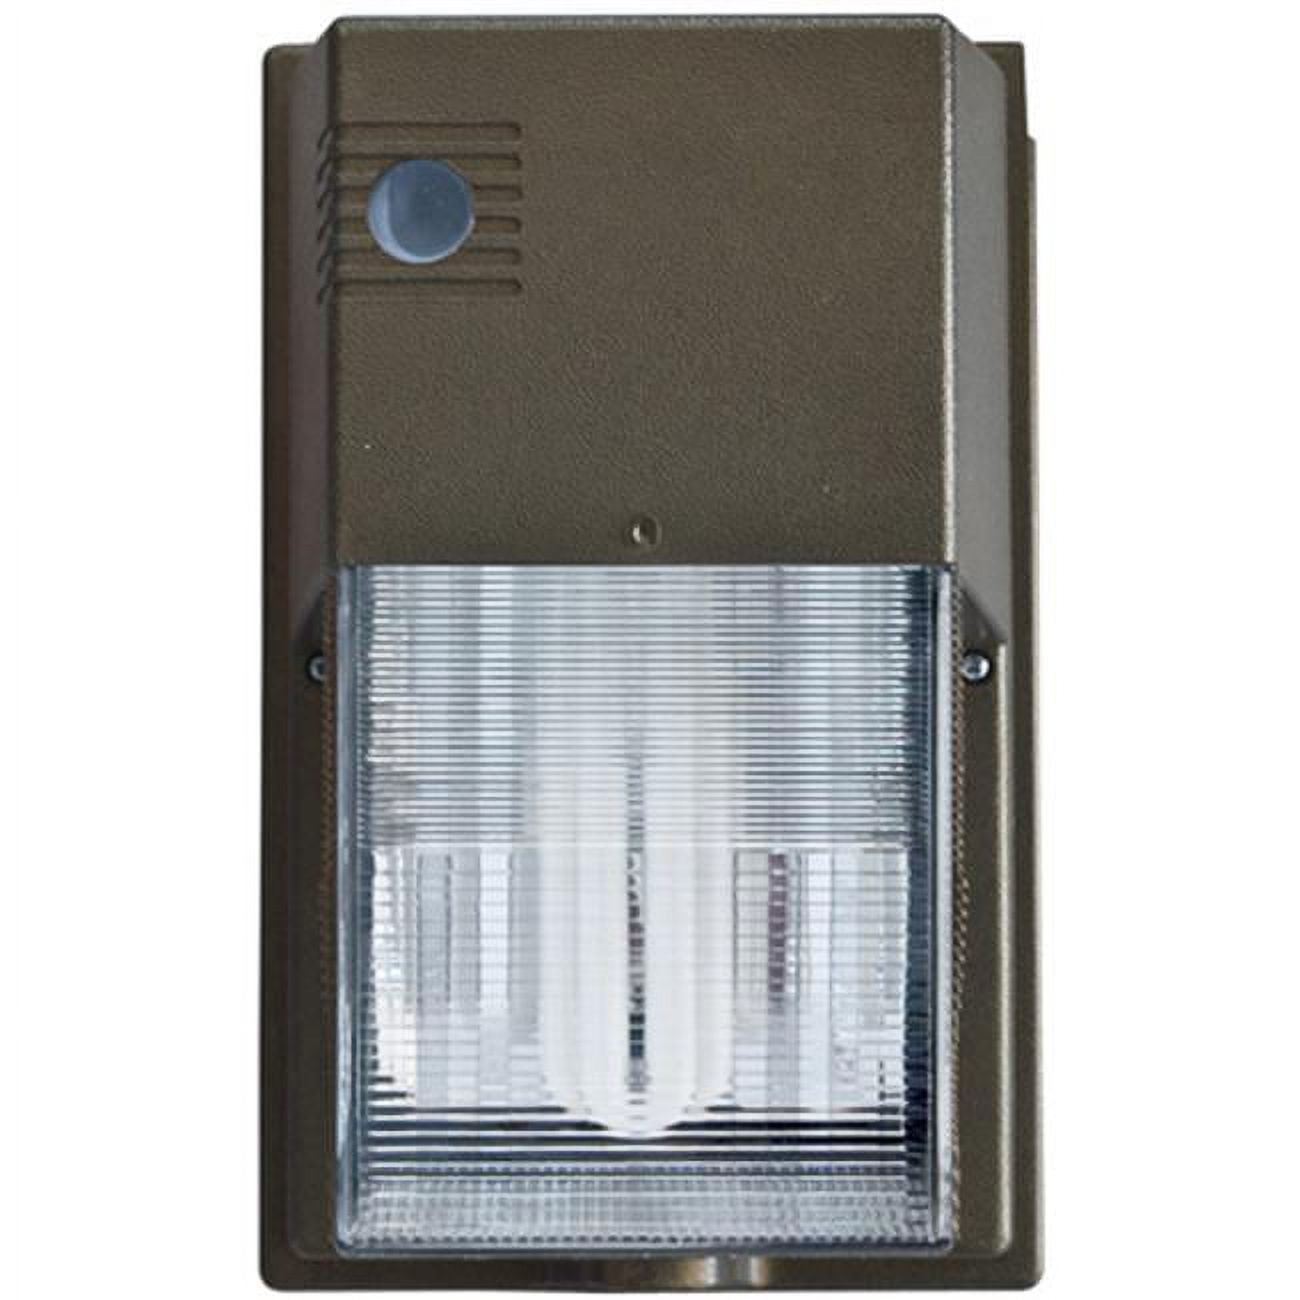 Picture of Dabmar Lighting DF6728-BZ 11 x 6.75 4.25 in. 120-277 V 52 watts Polycarbonate Surface Mounted Wall Fixture Light with PLQ26 Flourescent Lamp, Bronze